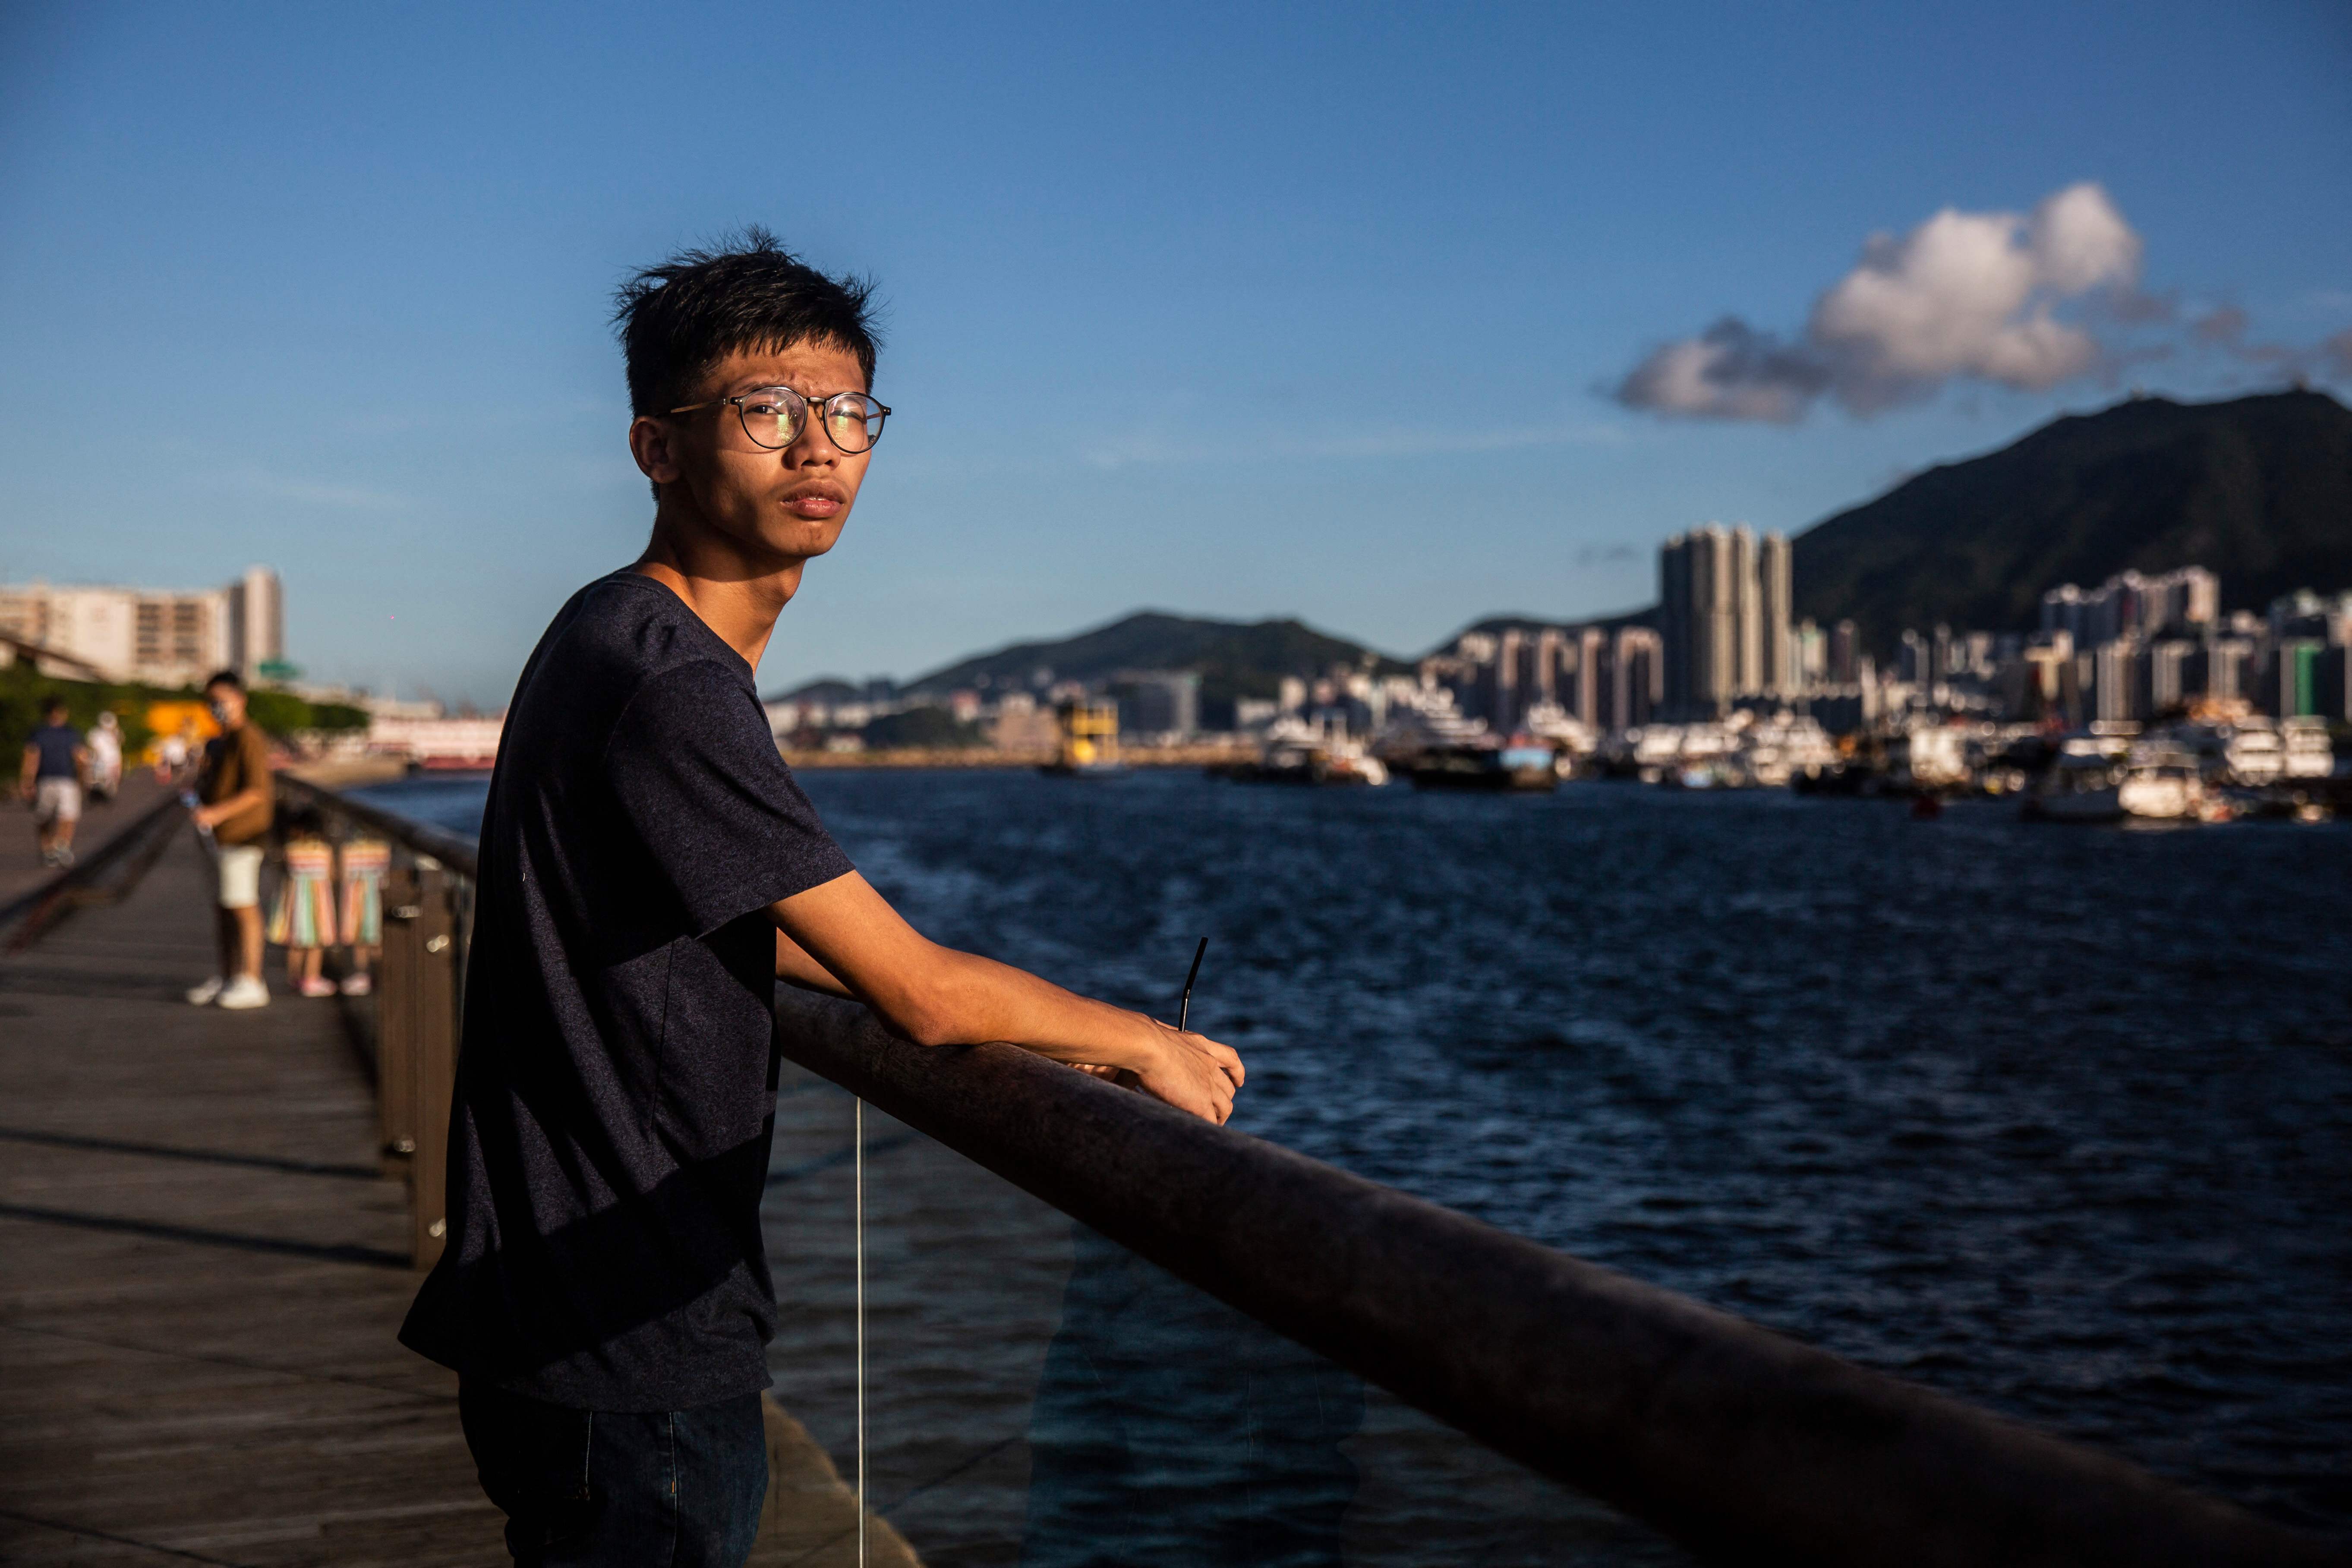 Tony Chung, a 20-year-old Hong Kong independence activist, was sentenced to three and a half years behind bars on 23 November, 2021 after pleading guilty to secession